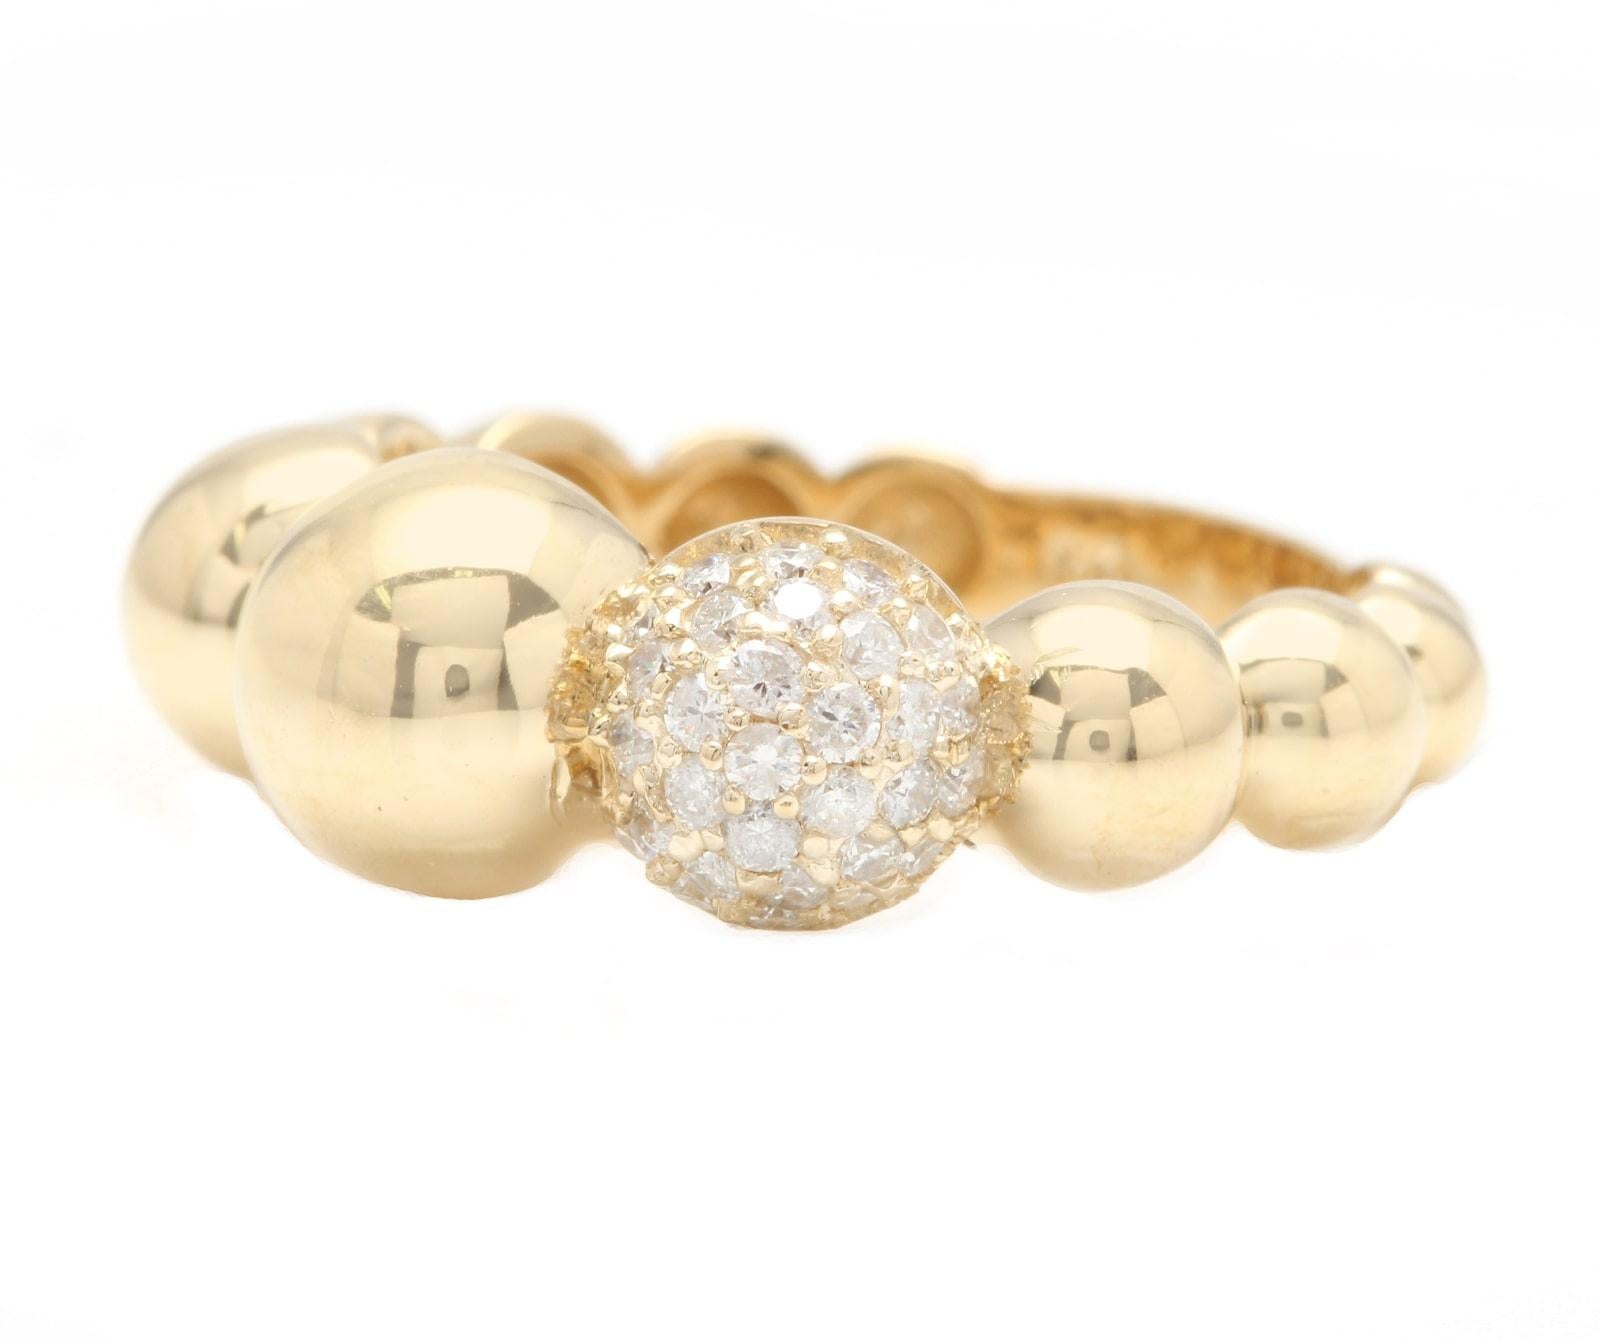 Splendid 0.32 Carats Natural Diamond 14K Solid Yellow Gold Ring

Suggested Replacement Value: Approx. $1,900.00

Stamped: 14K

Total Natural Round Cut Diamonds Weight: Approx. 0.32 Carats (color G-H / Clarity SI1-SI2)

The width of the ring is: